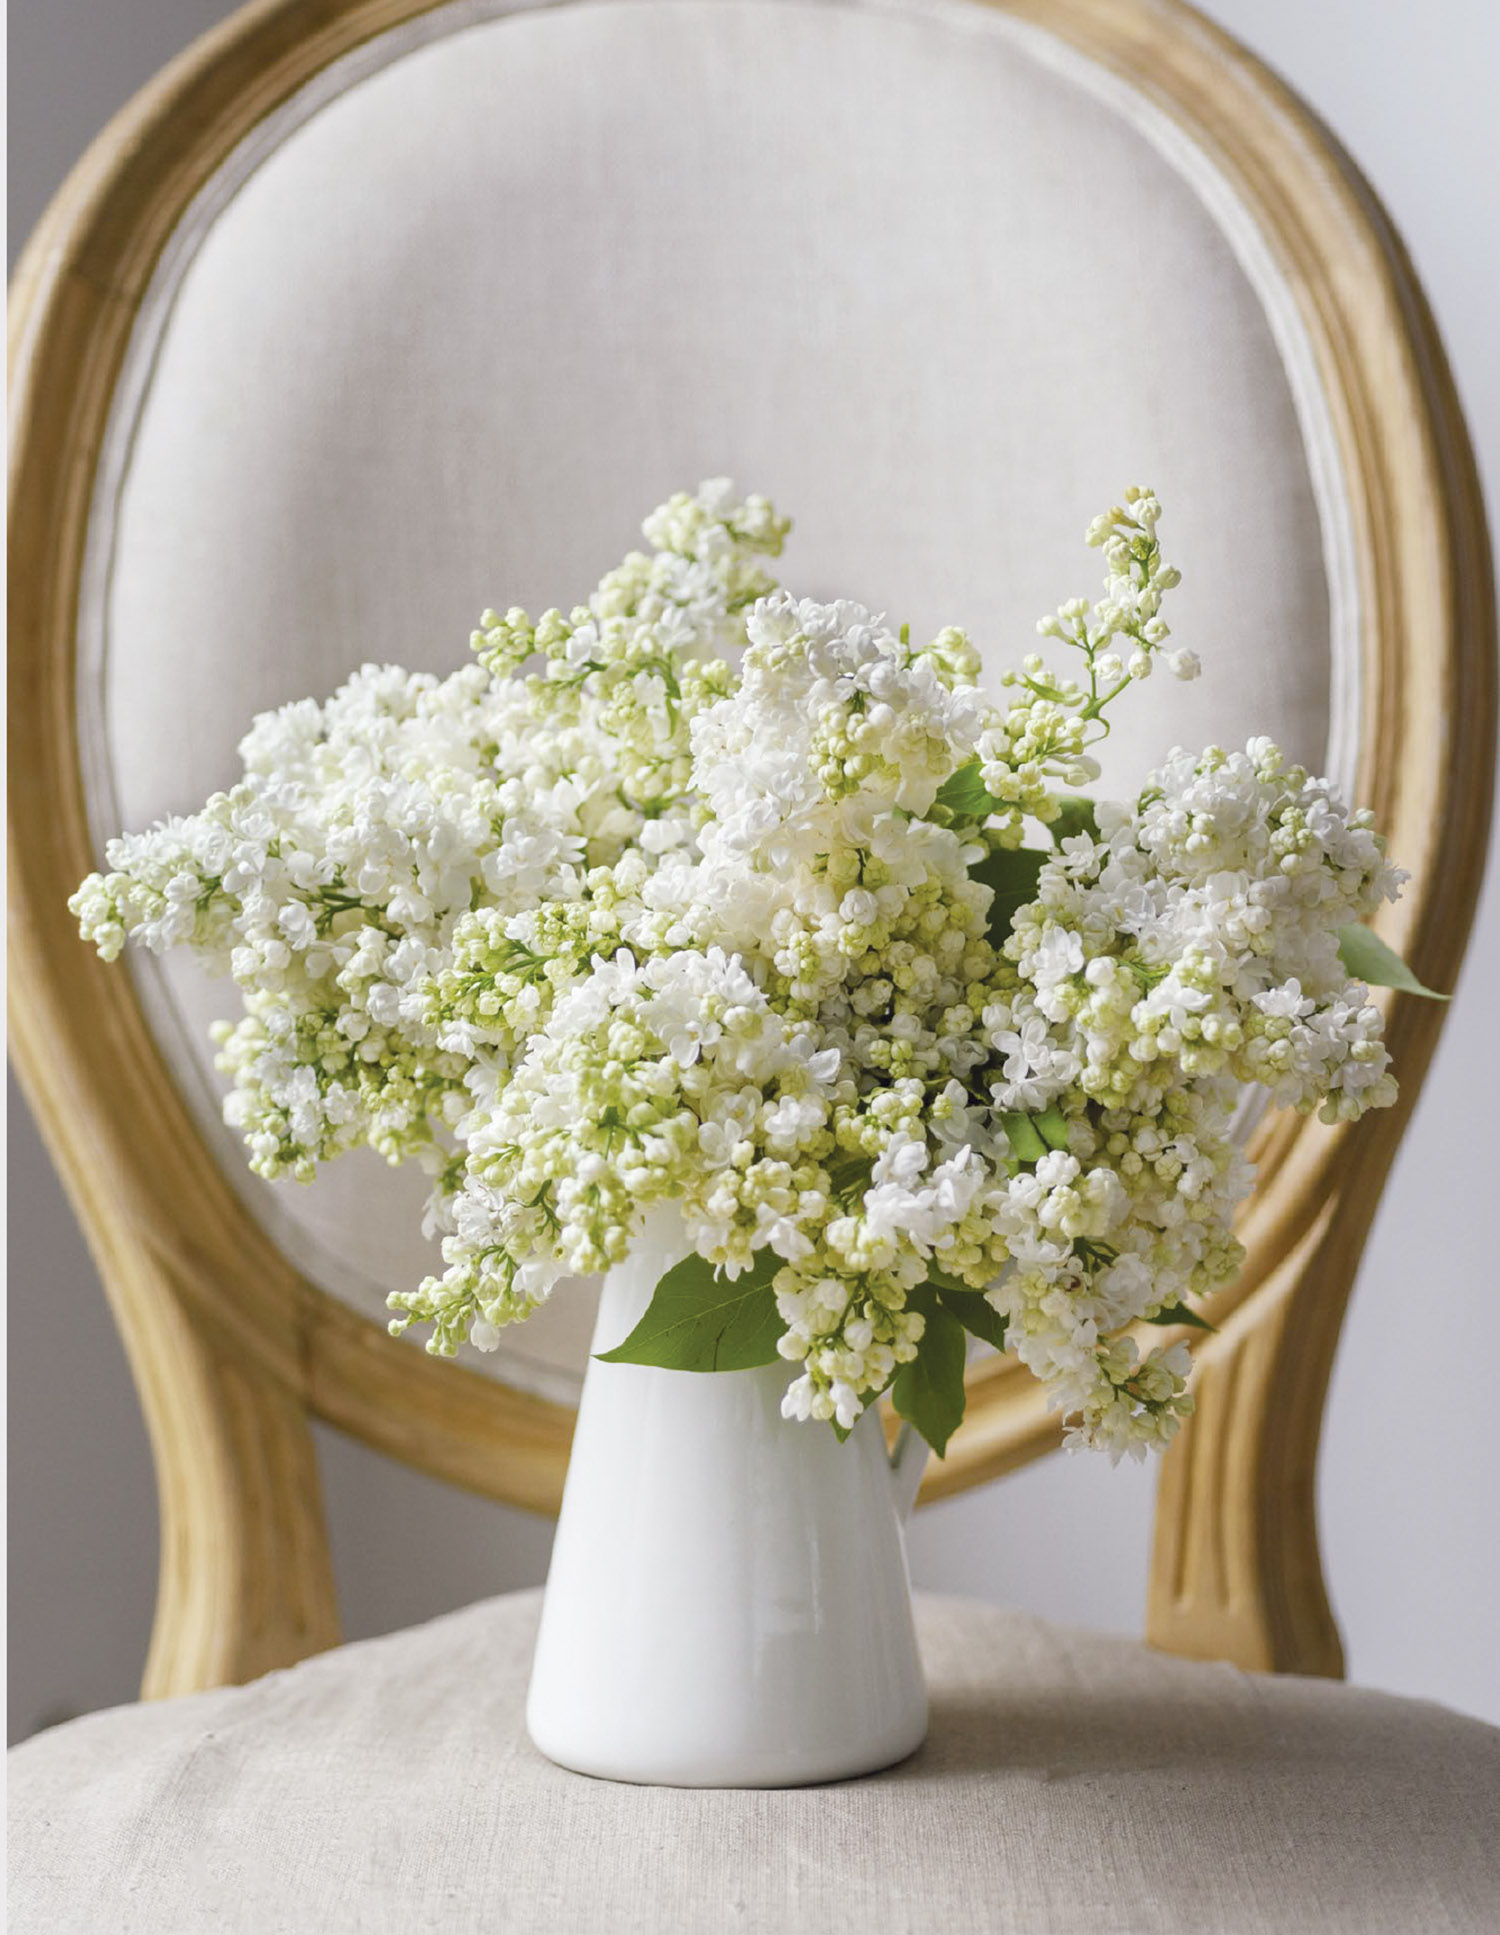 Arrangement of white lilacs in a white ceramic pitcher